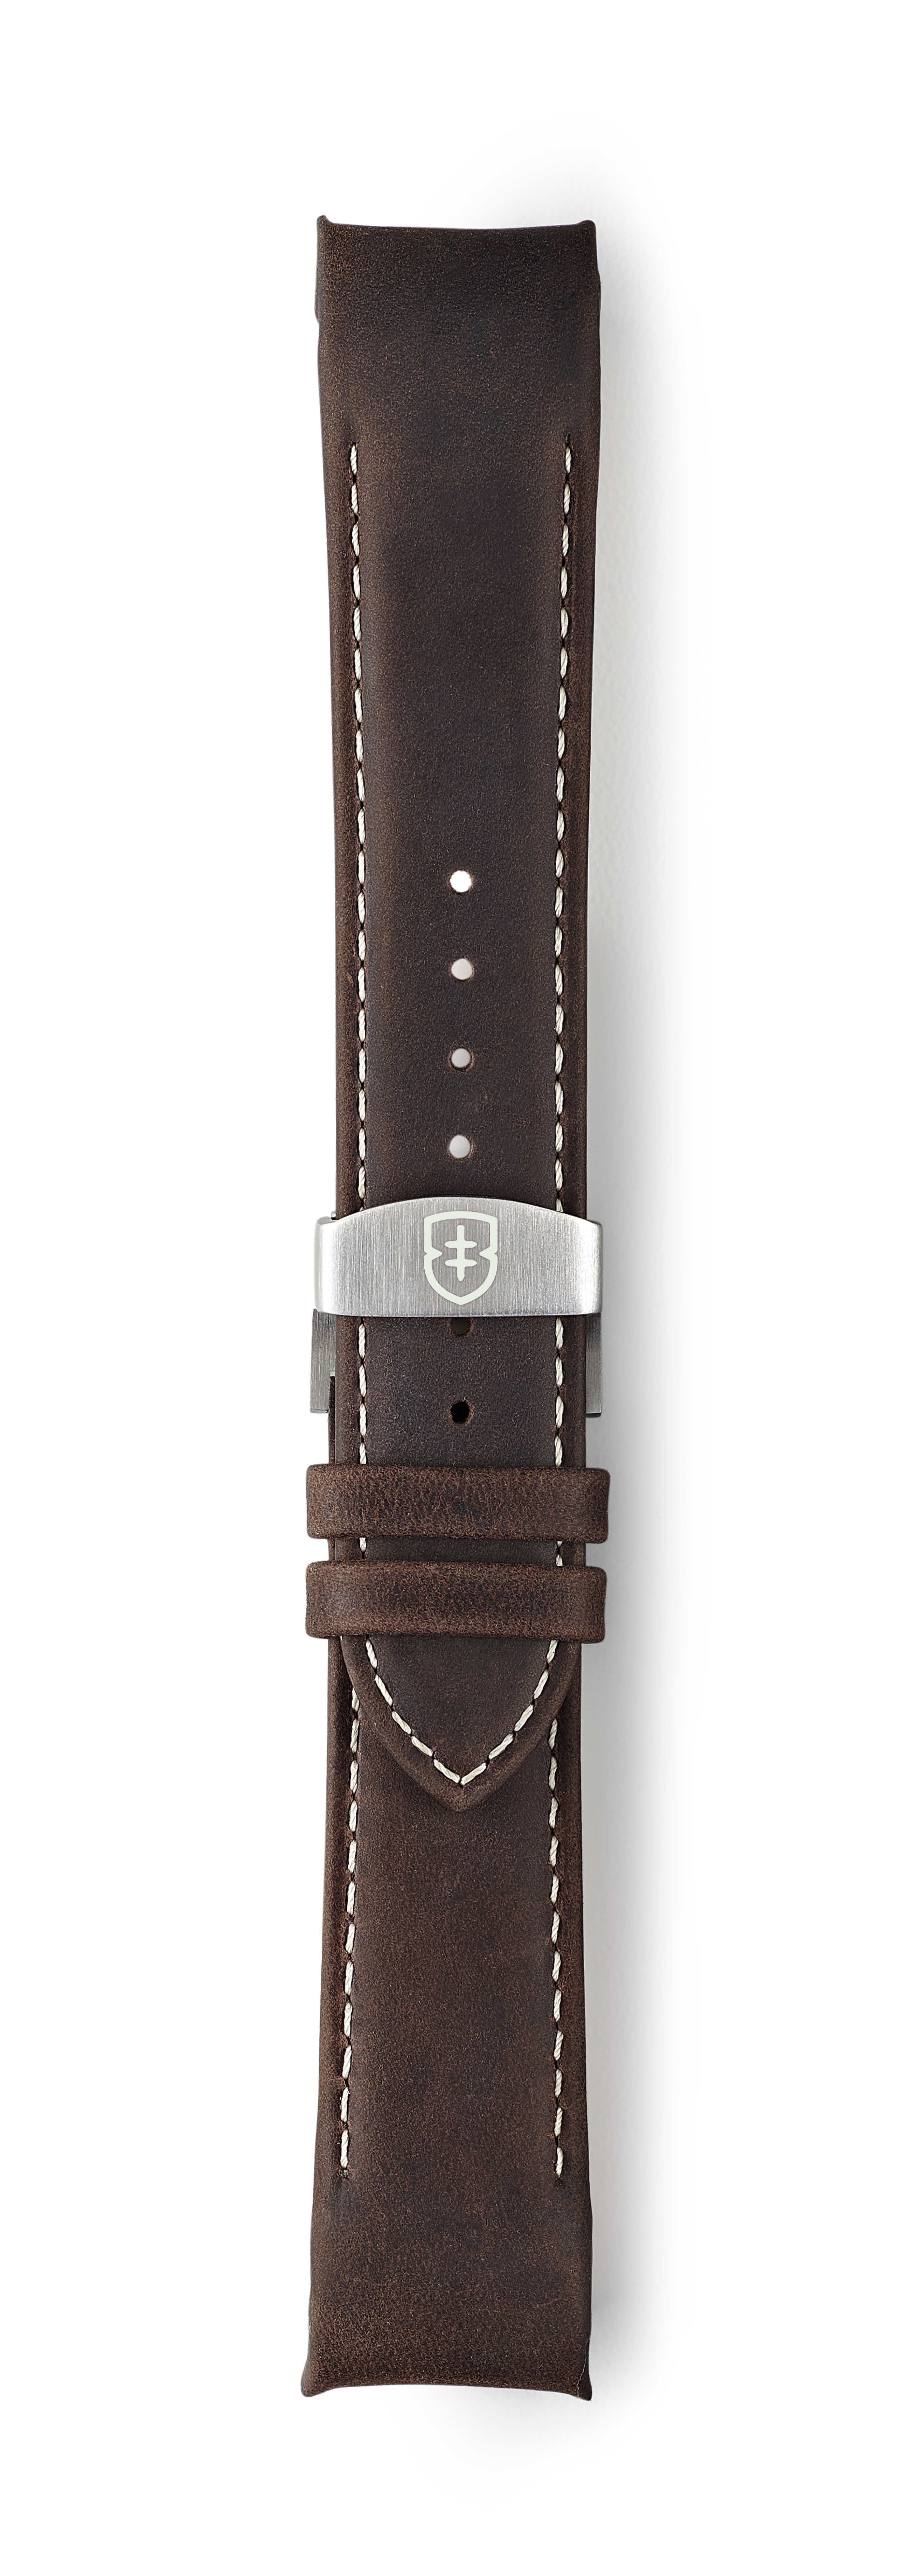 STR-L24: Dark Brown Waxed Leather with Contrast Stitch, Brushed Steel Deployant